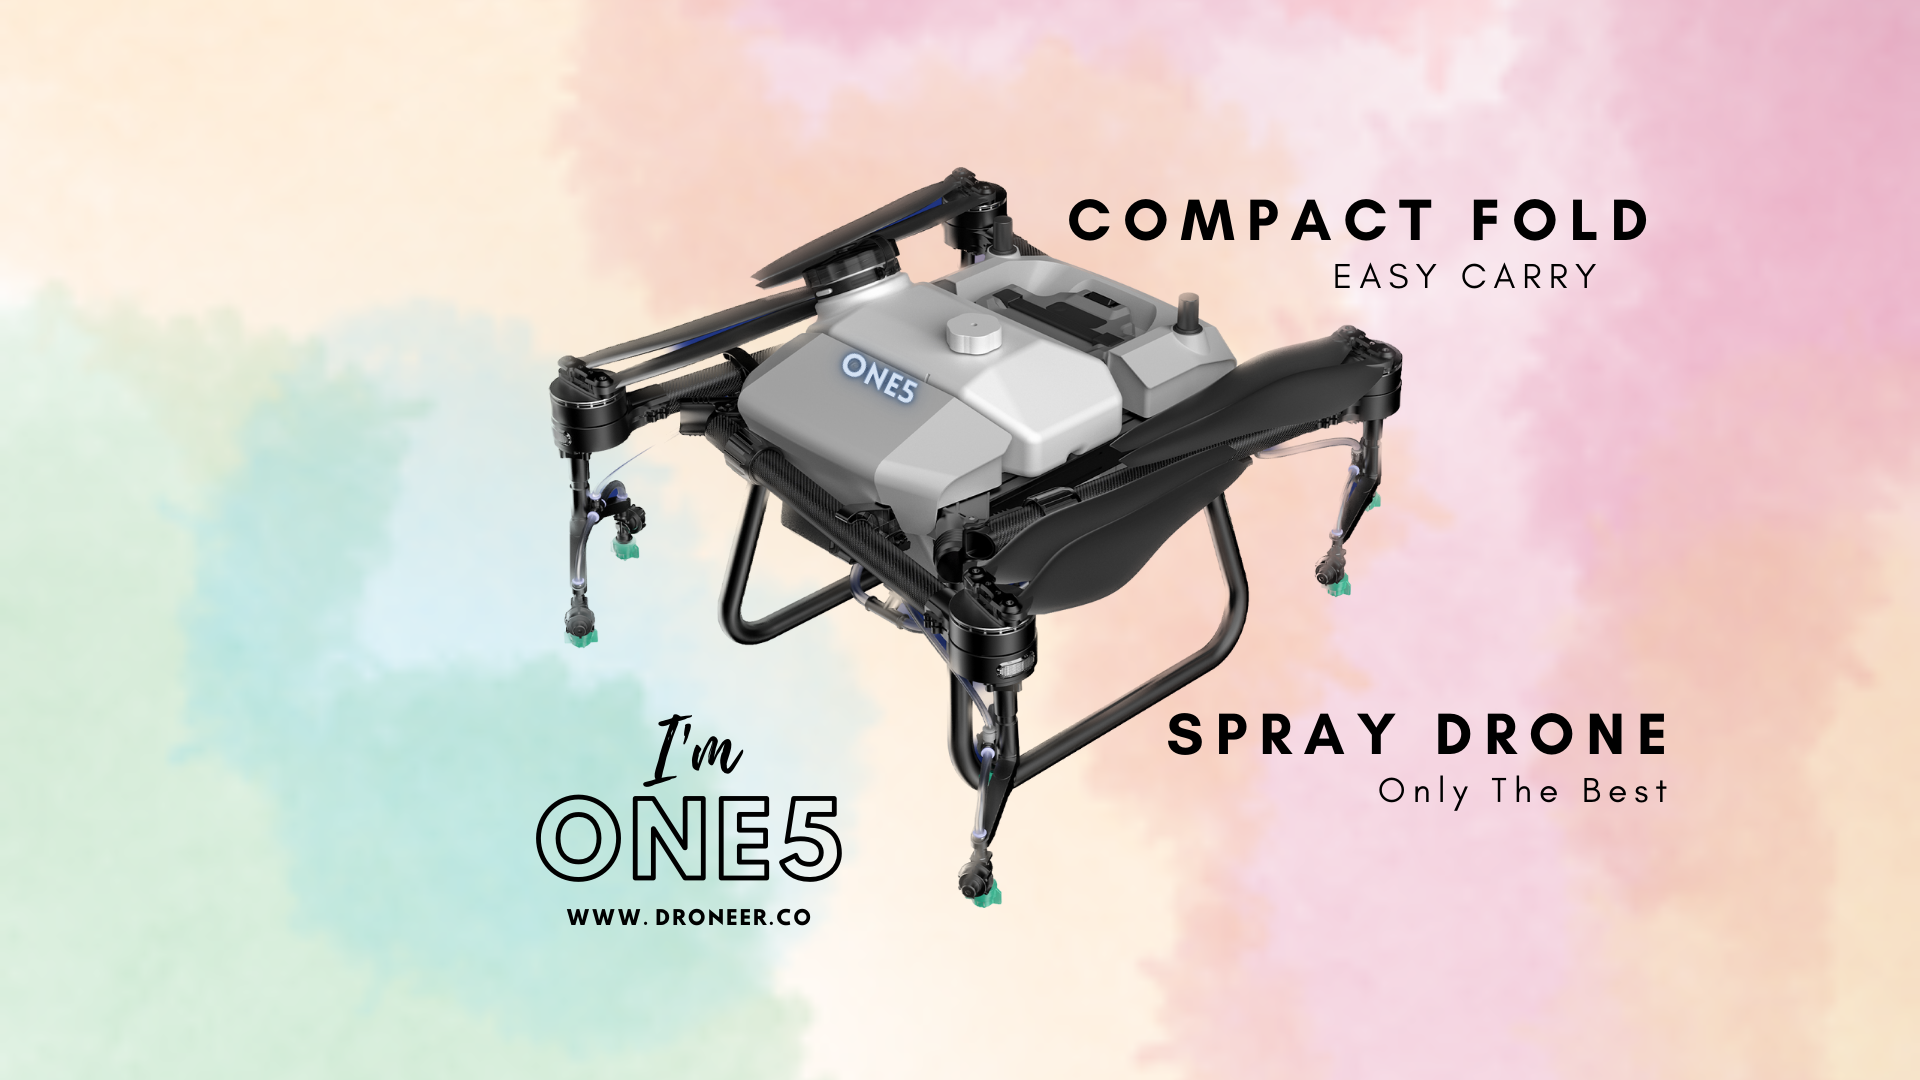 Best Compact Foldable Agri Drone India